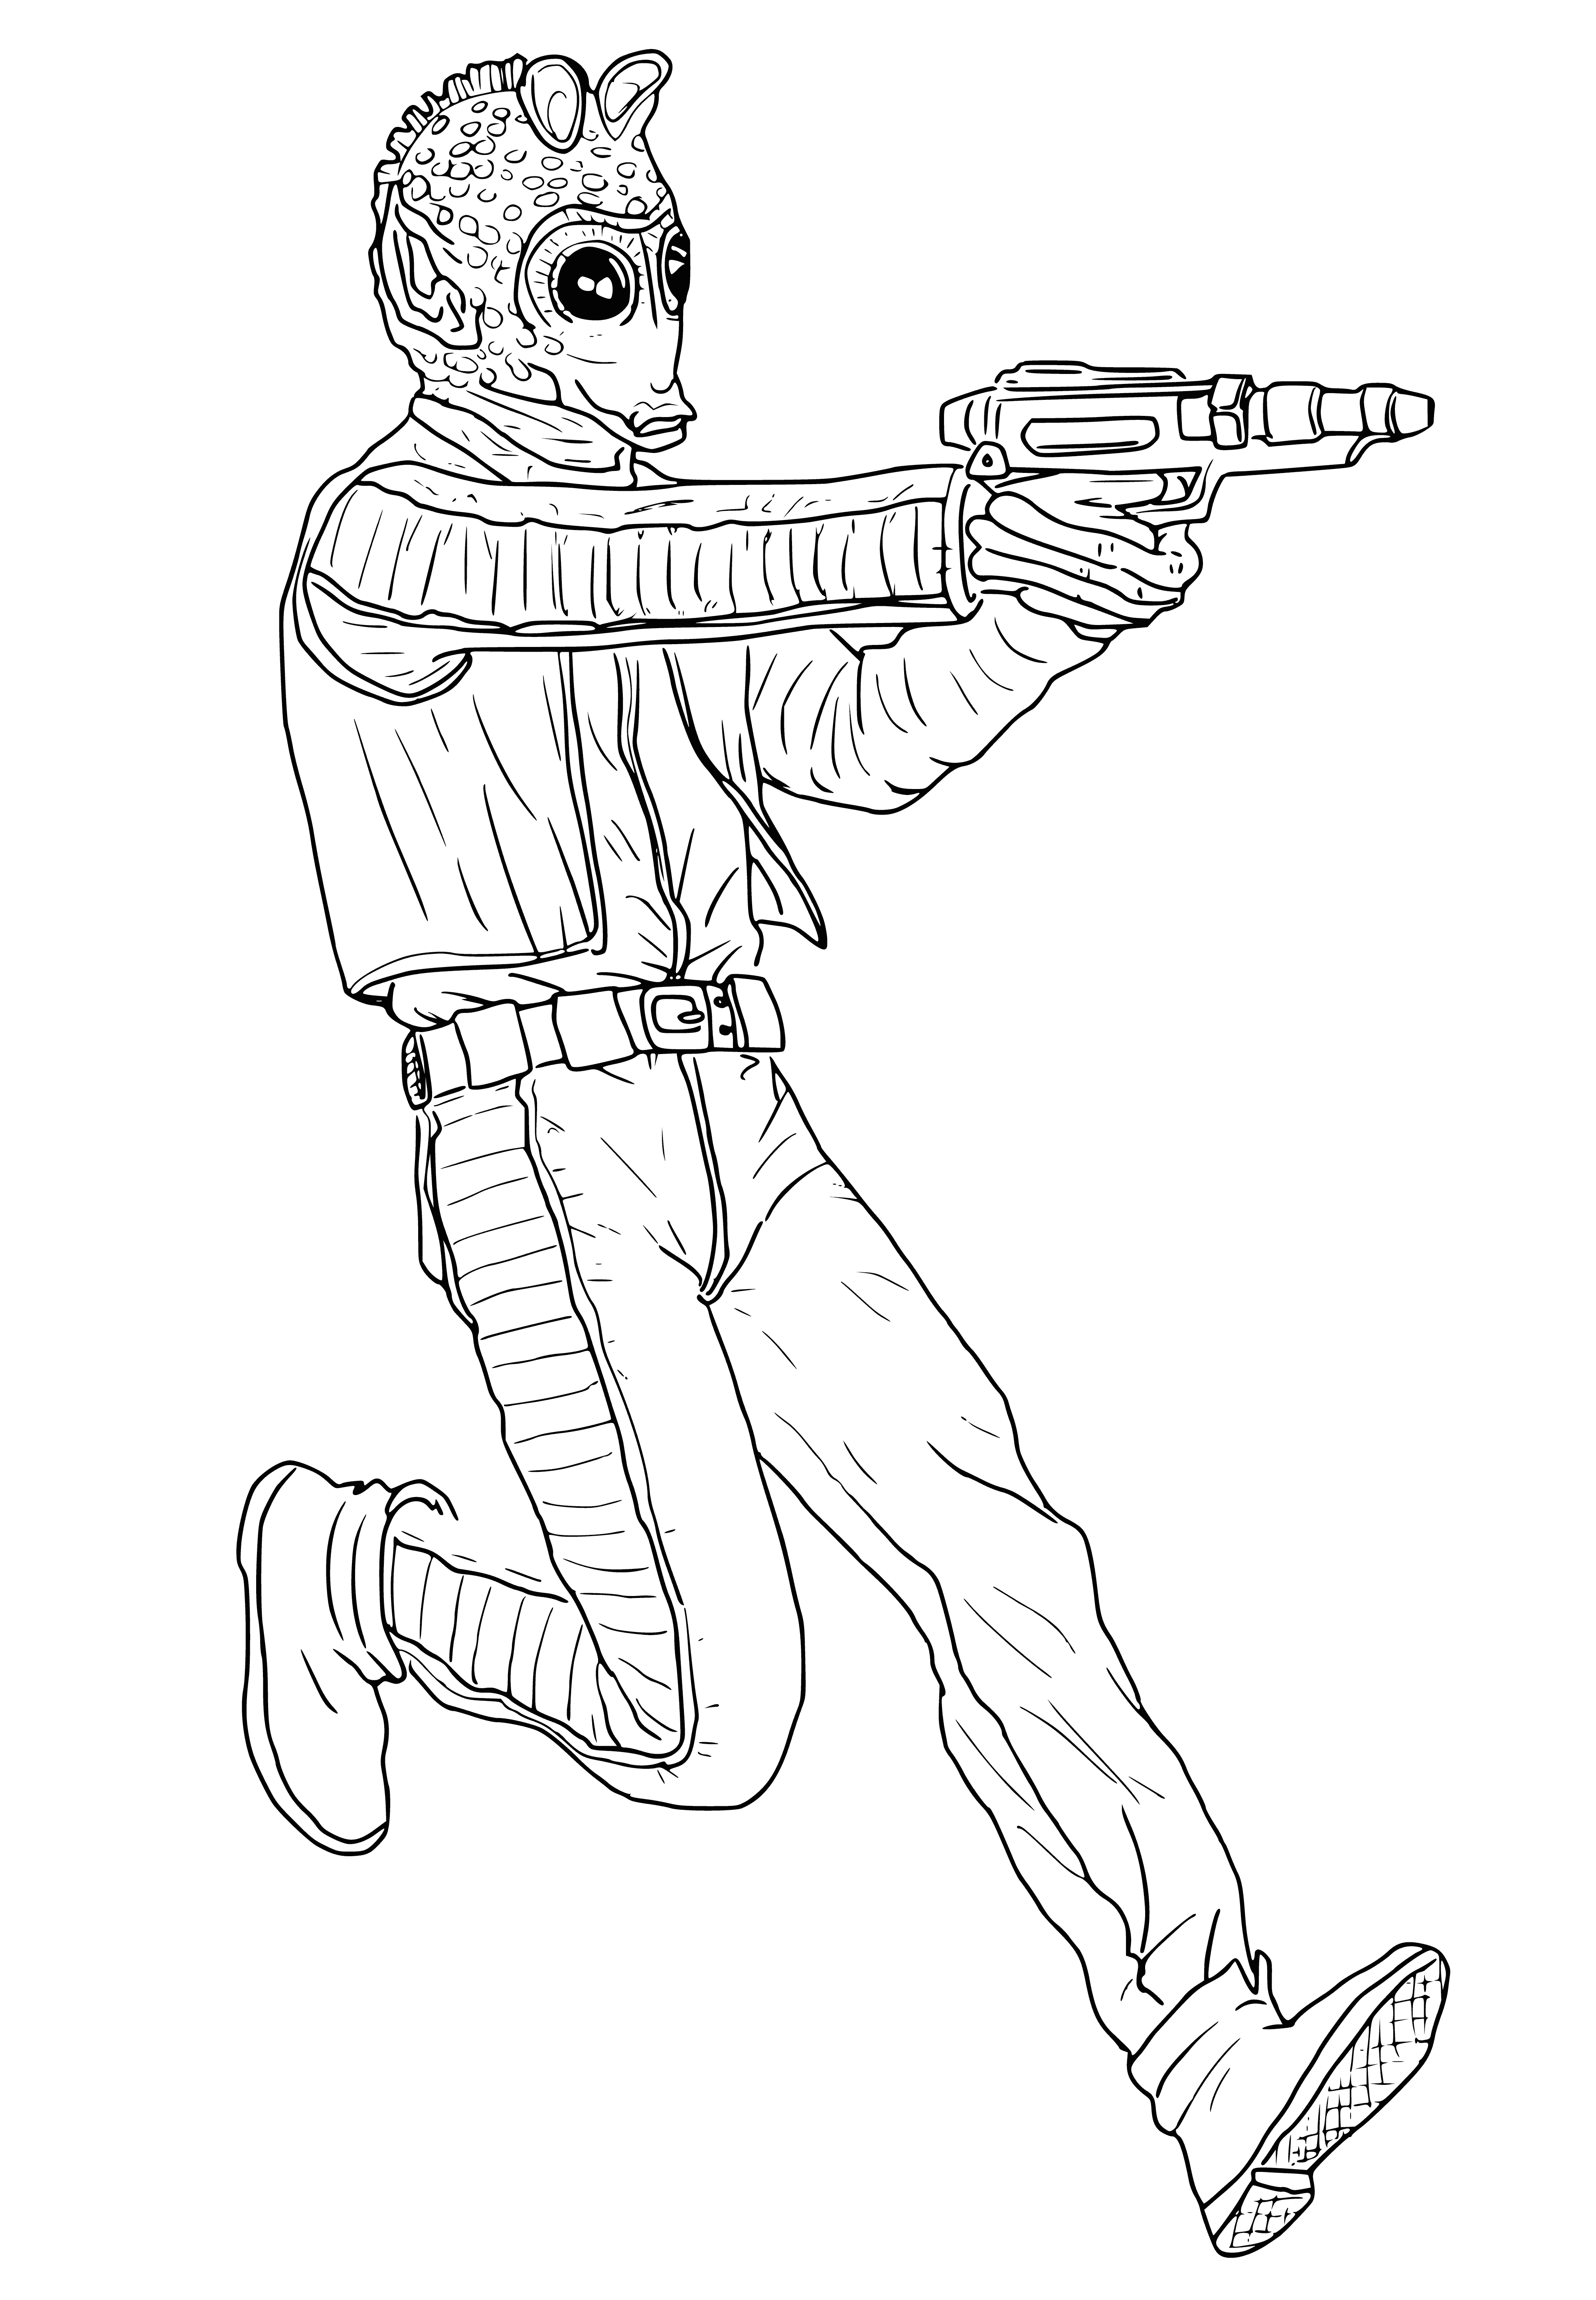 coloring page: A bounty hunter holds a blaster at a hooded figure, who has their hand on their hip.